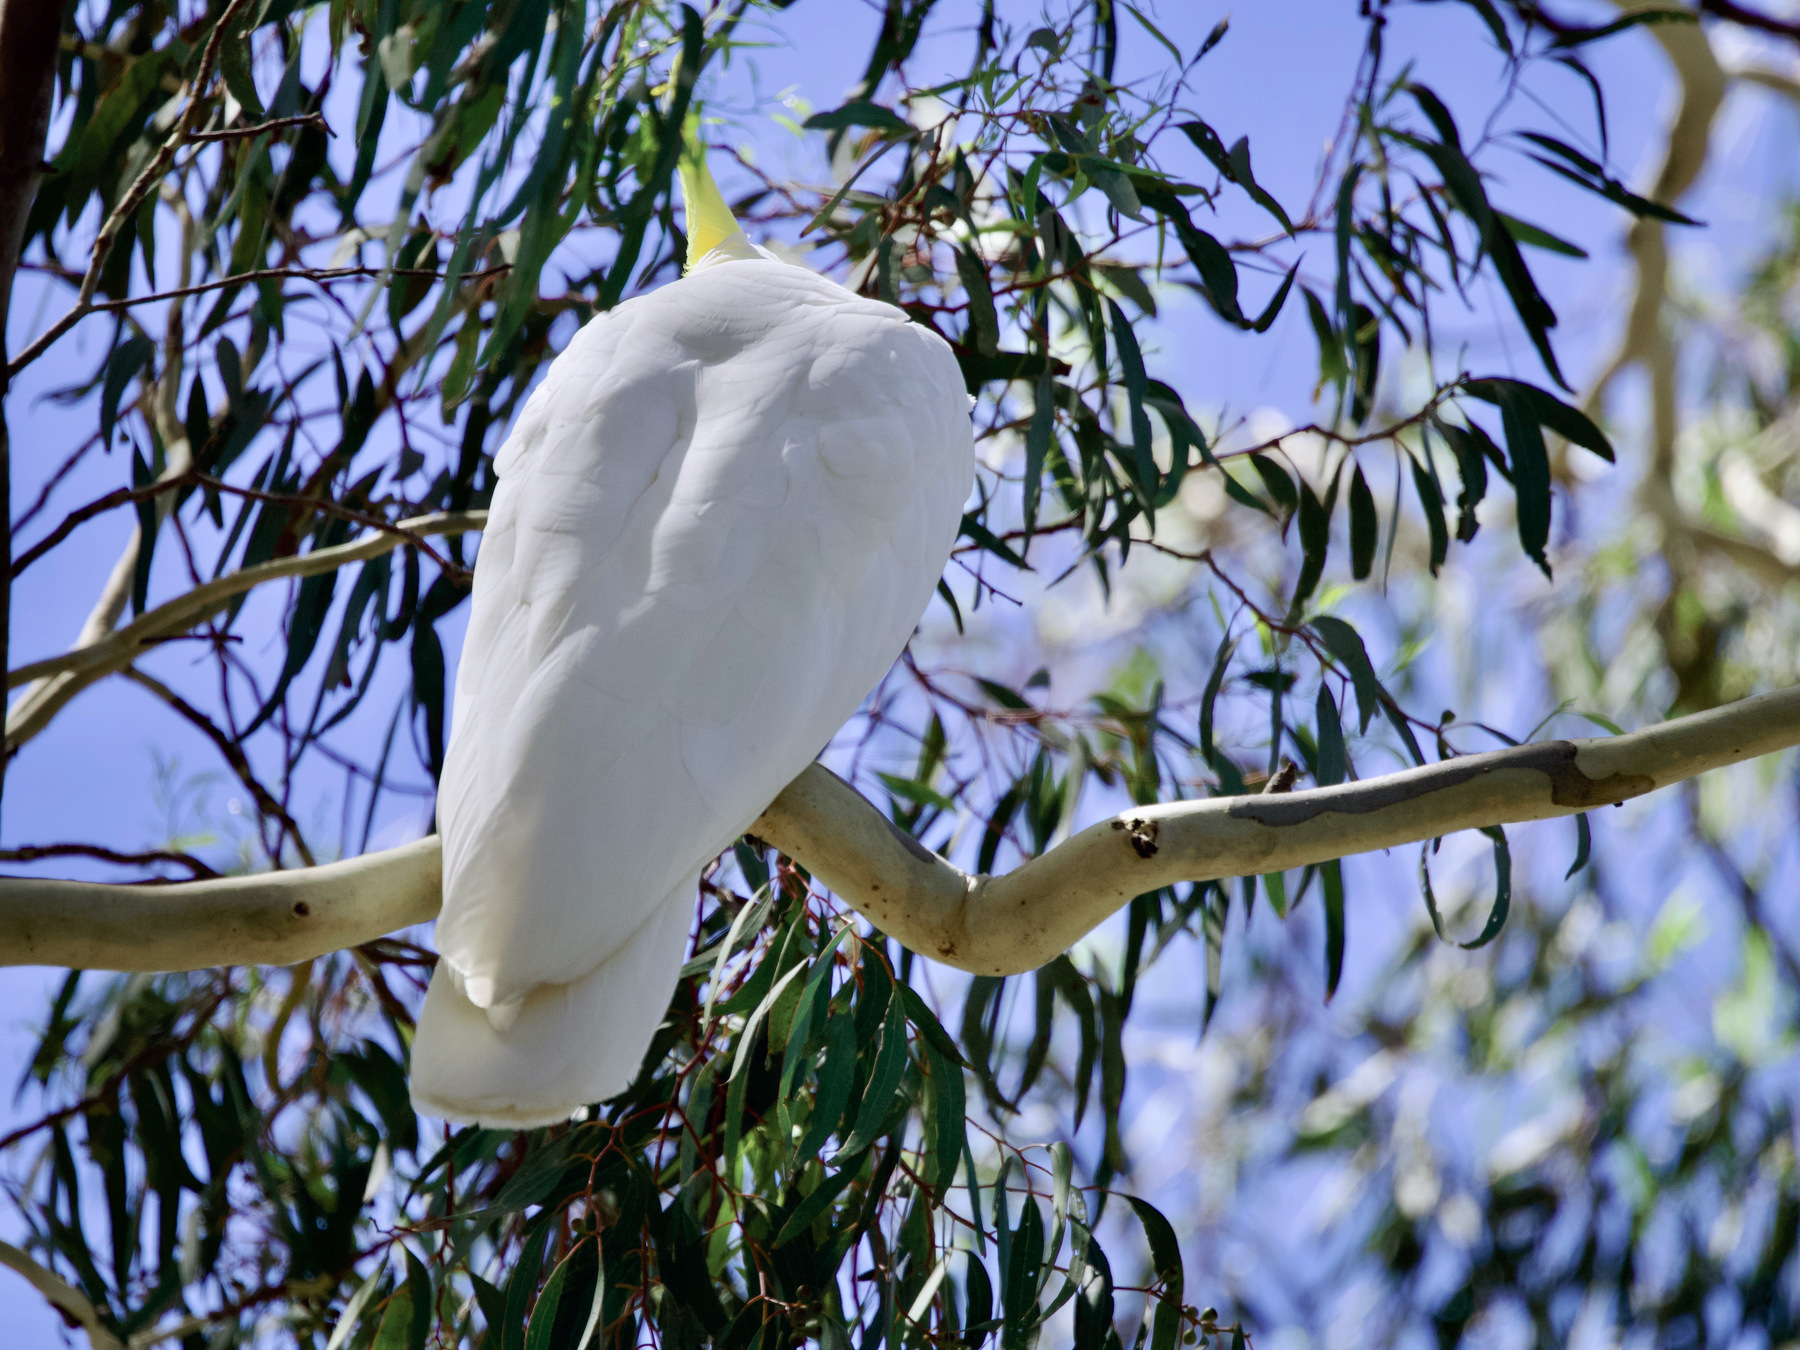 Looking at the back of a cockatoo high up in a gum tree, after it flew away from the camera.